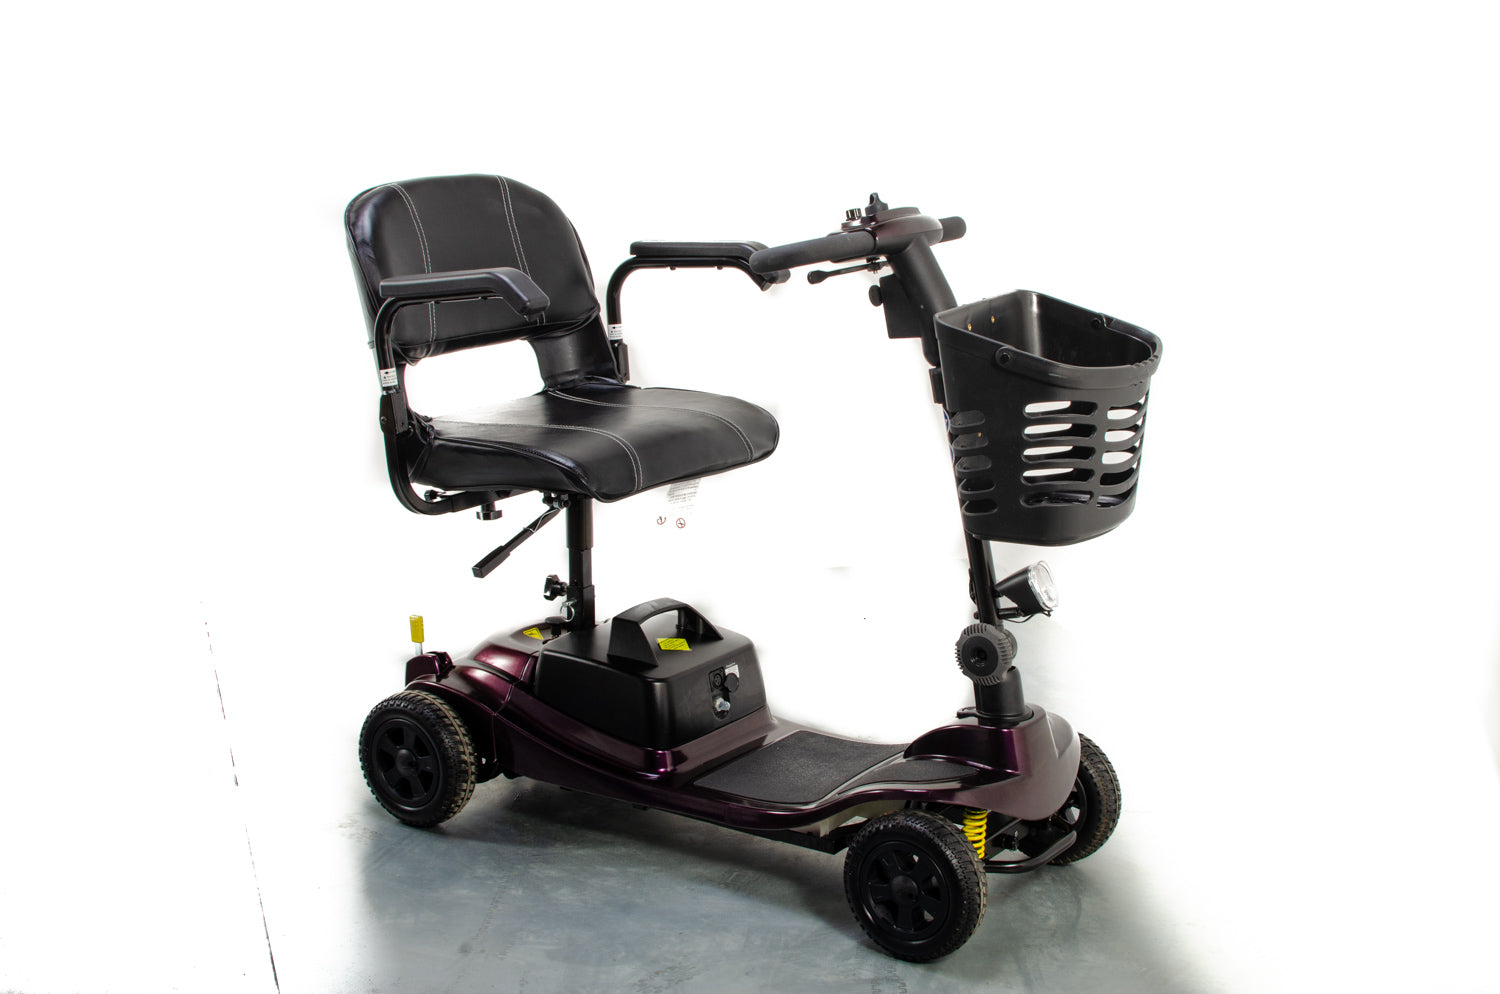 Liberty Vogue Lightweight Transportable Used Mobility Scooter Suspension Folding